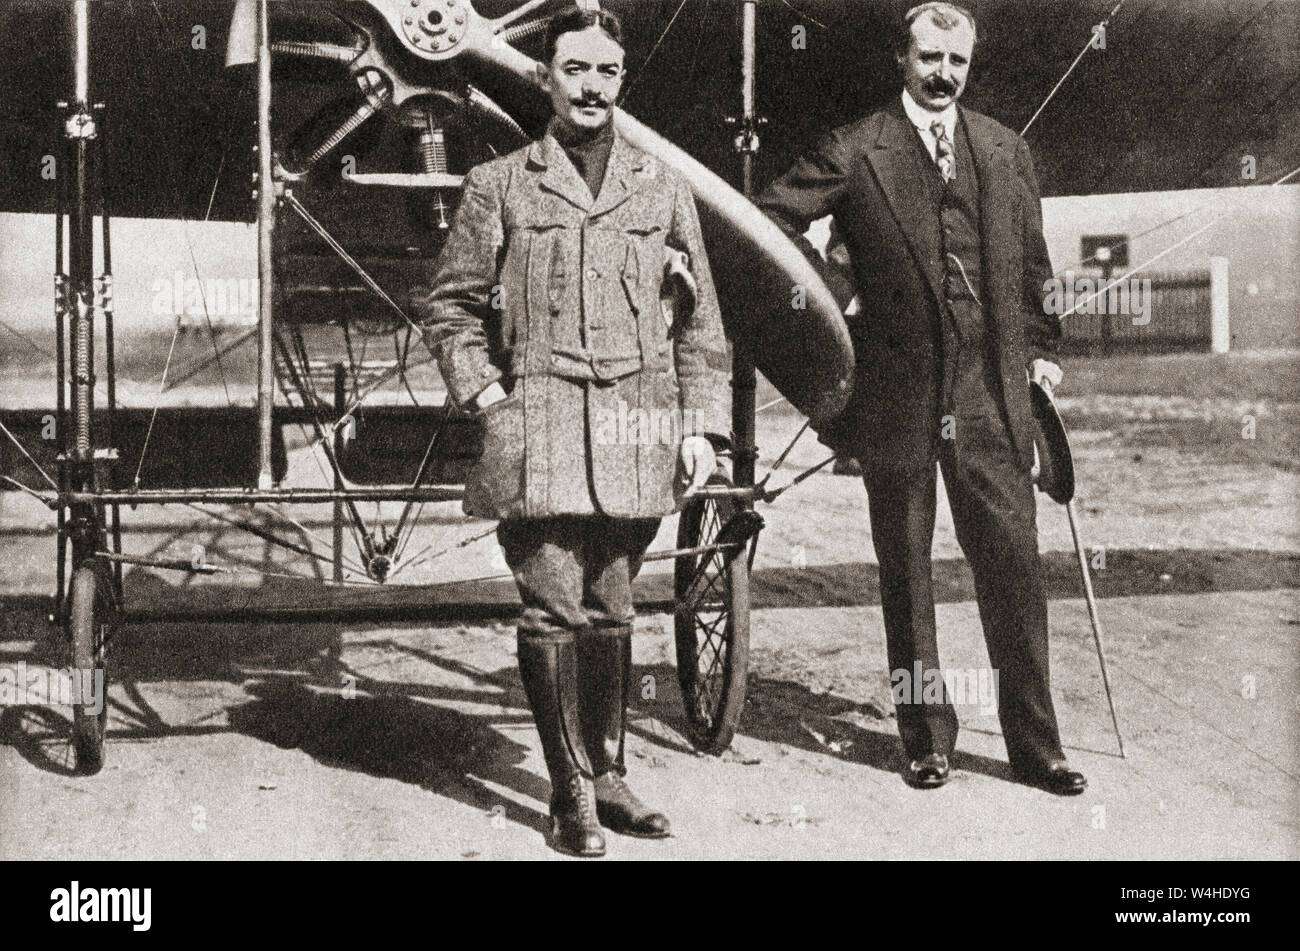 Monsieur Pegoud, left, and Monsieur Blériot, right, seen here at Brooklands flying school, Surrey, where the former had demonstrated his loop the loop in 1913.  Adolphe Célestin Pégoud, 1889 – 1915.  French aviator and flight instructor, the first fighter ace in history during World War I.   Louis Charles Joseph Blériot, 1872 – 1936.  French aviator, inventor and engineer.  From The Pageant of the Century, published 1934. Stock Photo